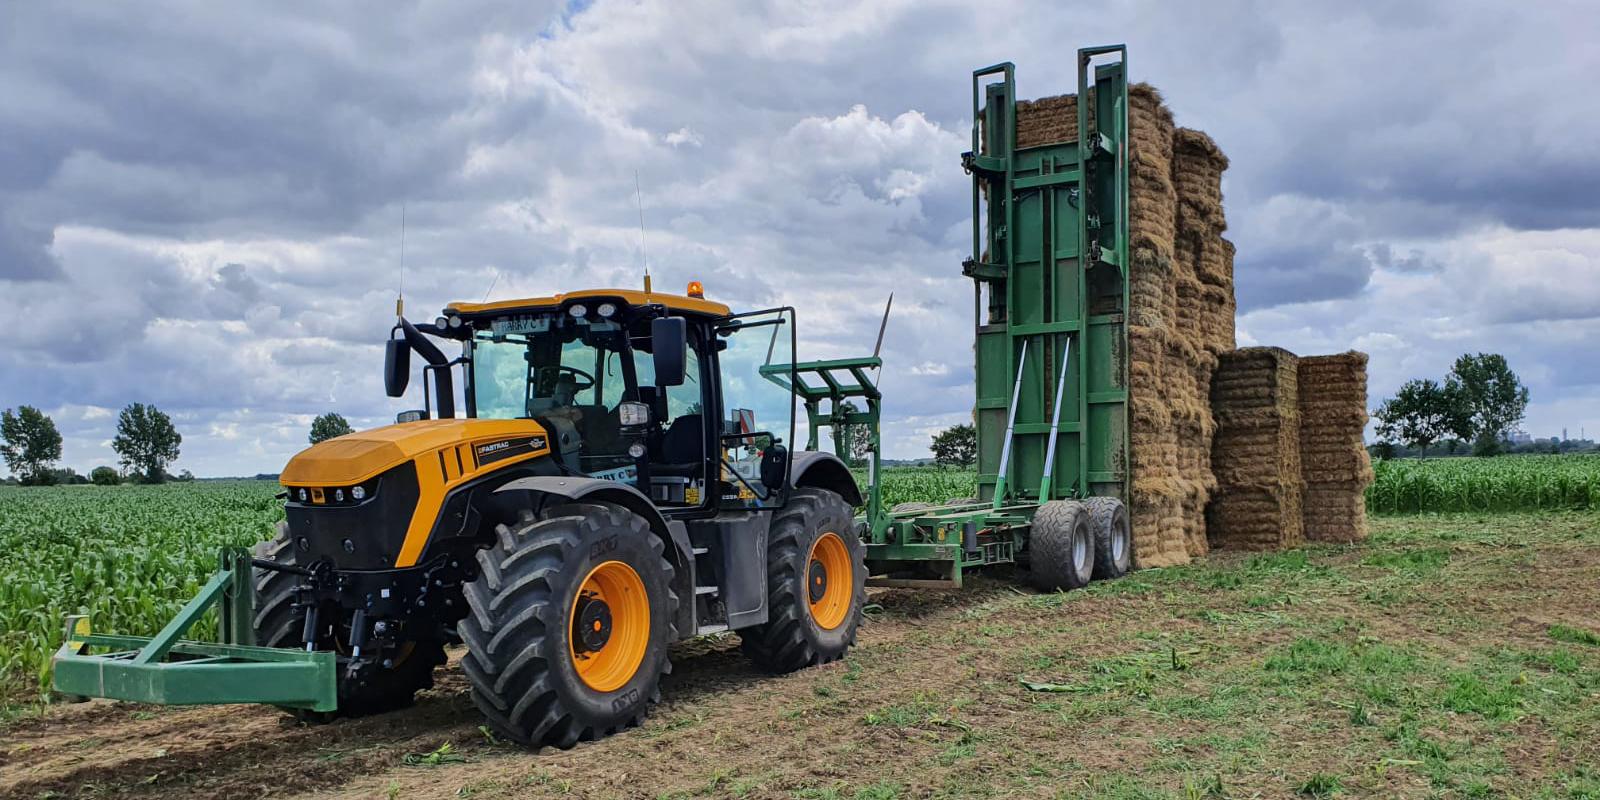 JCB Stacking bales with Trailer